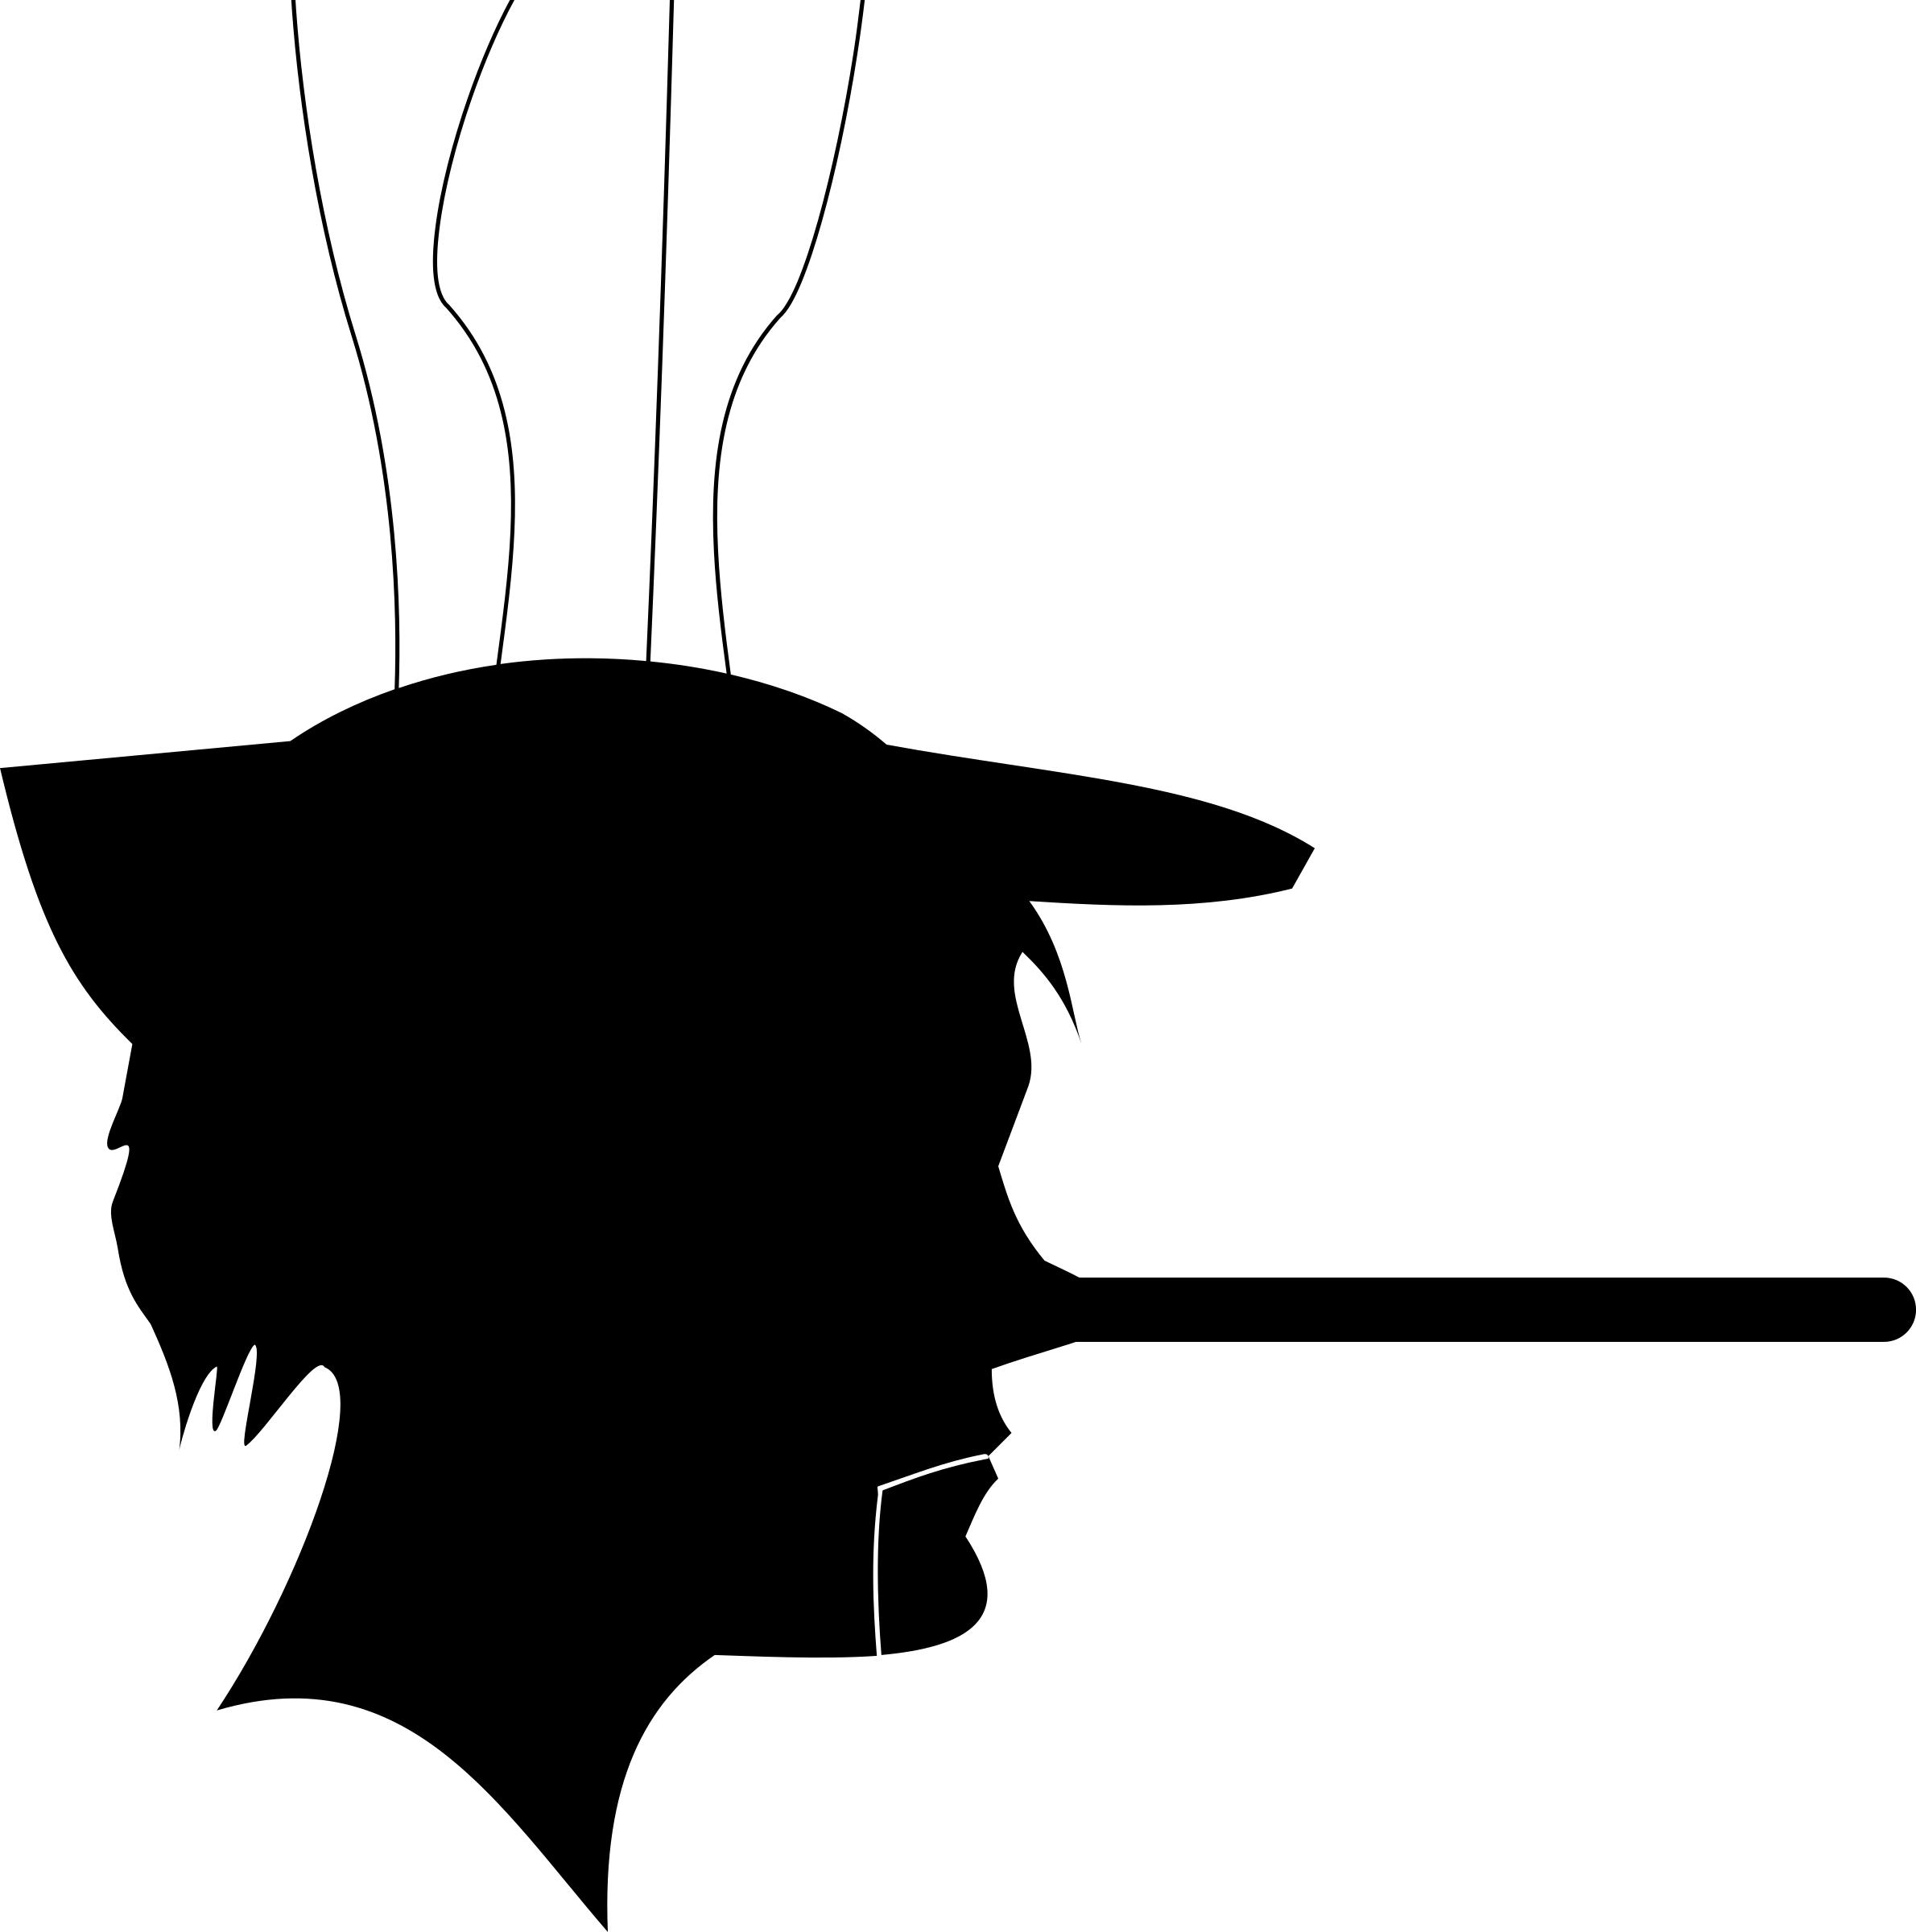 Pinocchio Puppet Silhouette Profile png